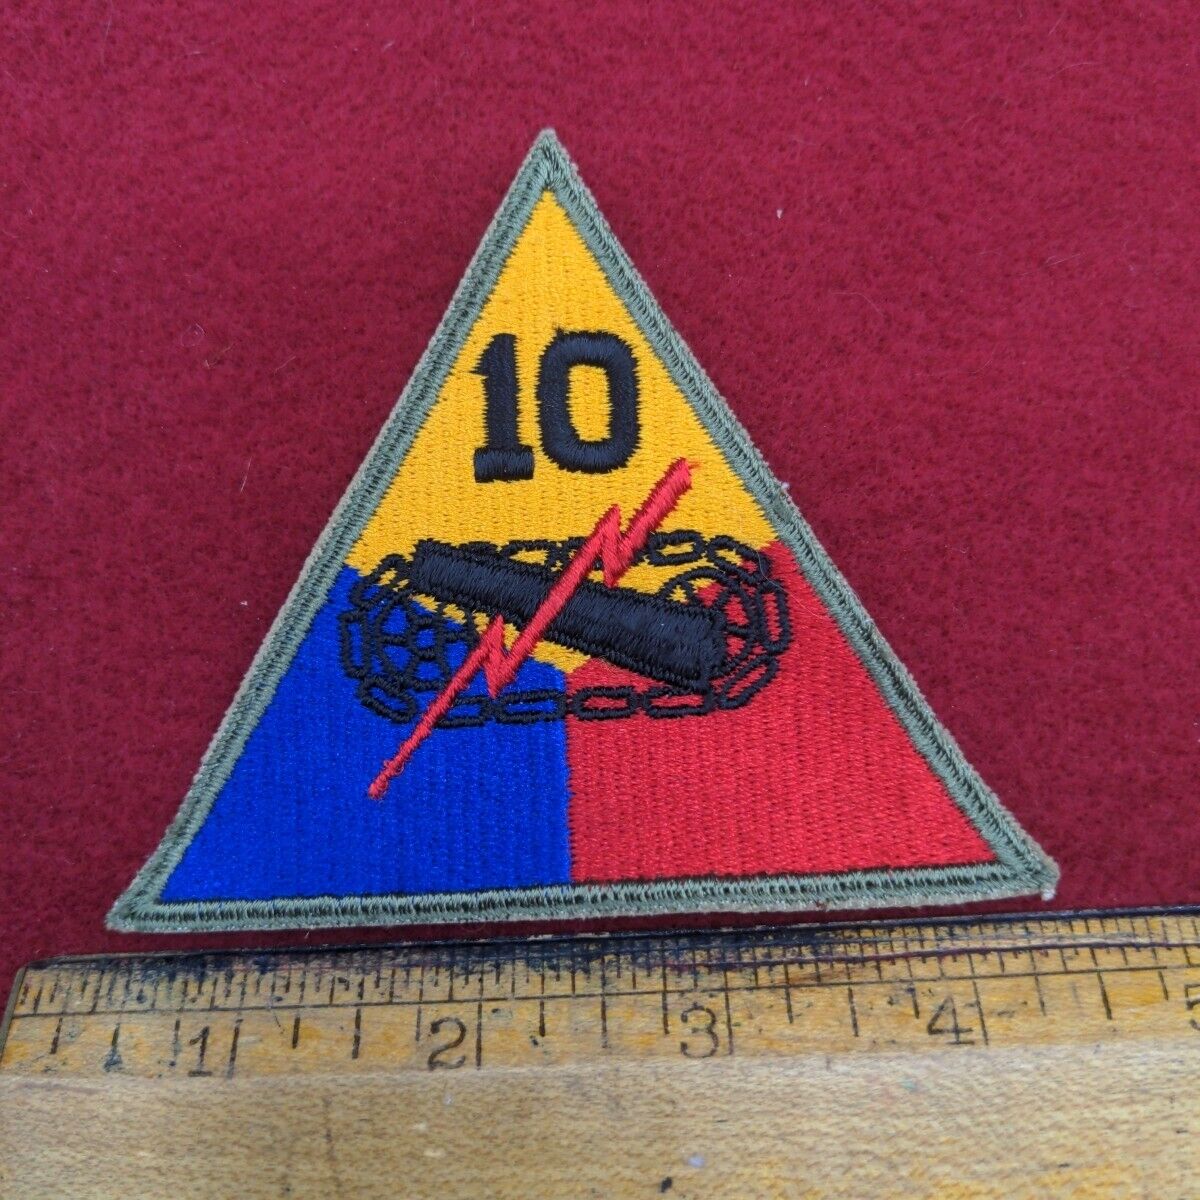 WWII/2 US Army 10th Armored Division triangular patch.